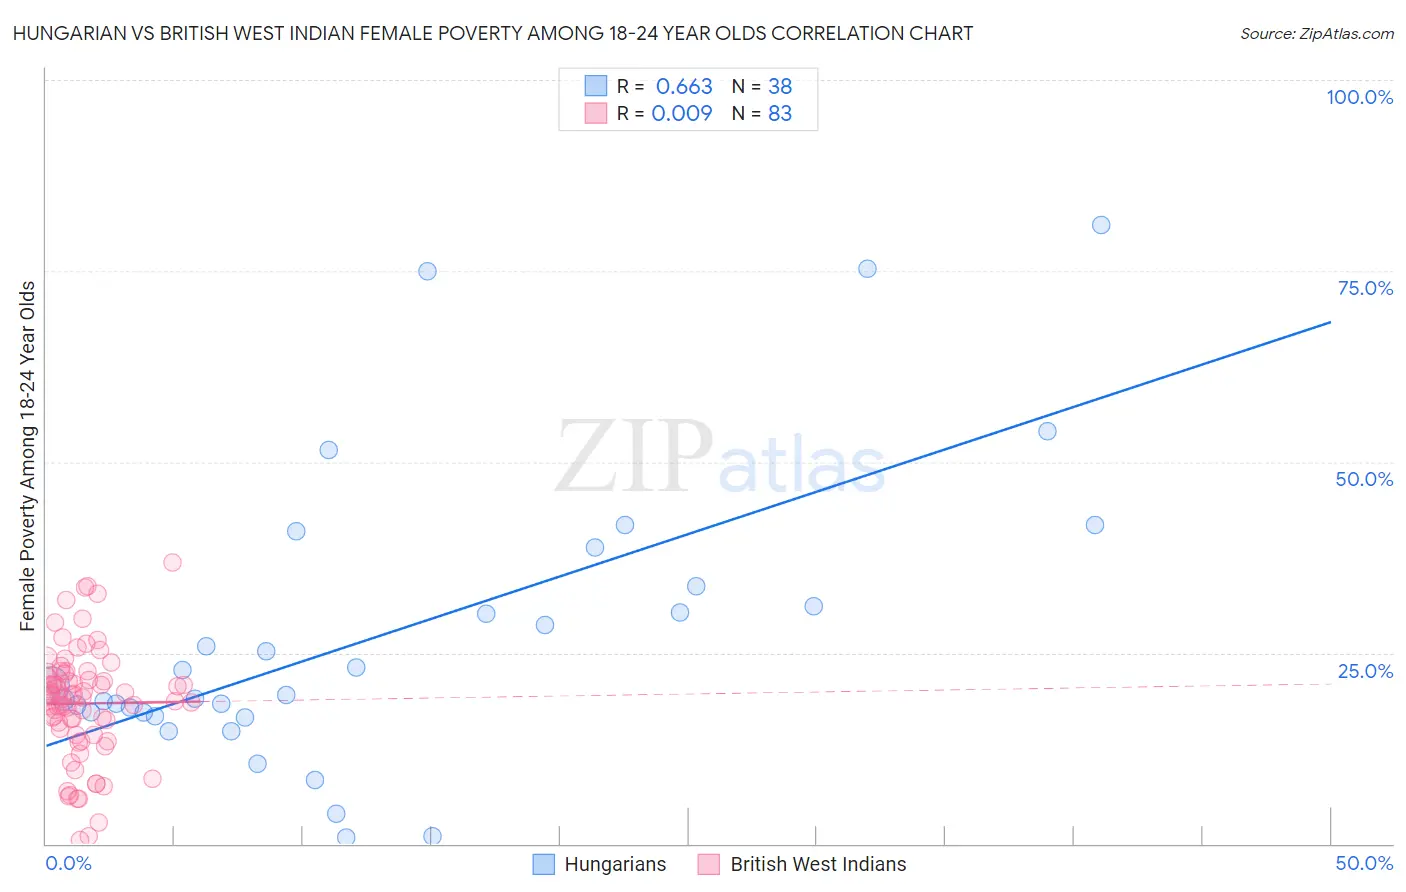 Hungarian vs British West Indian Female Poverty Among 18-24 Year Olds